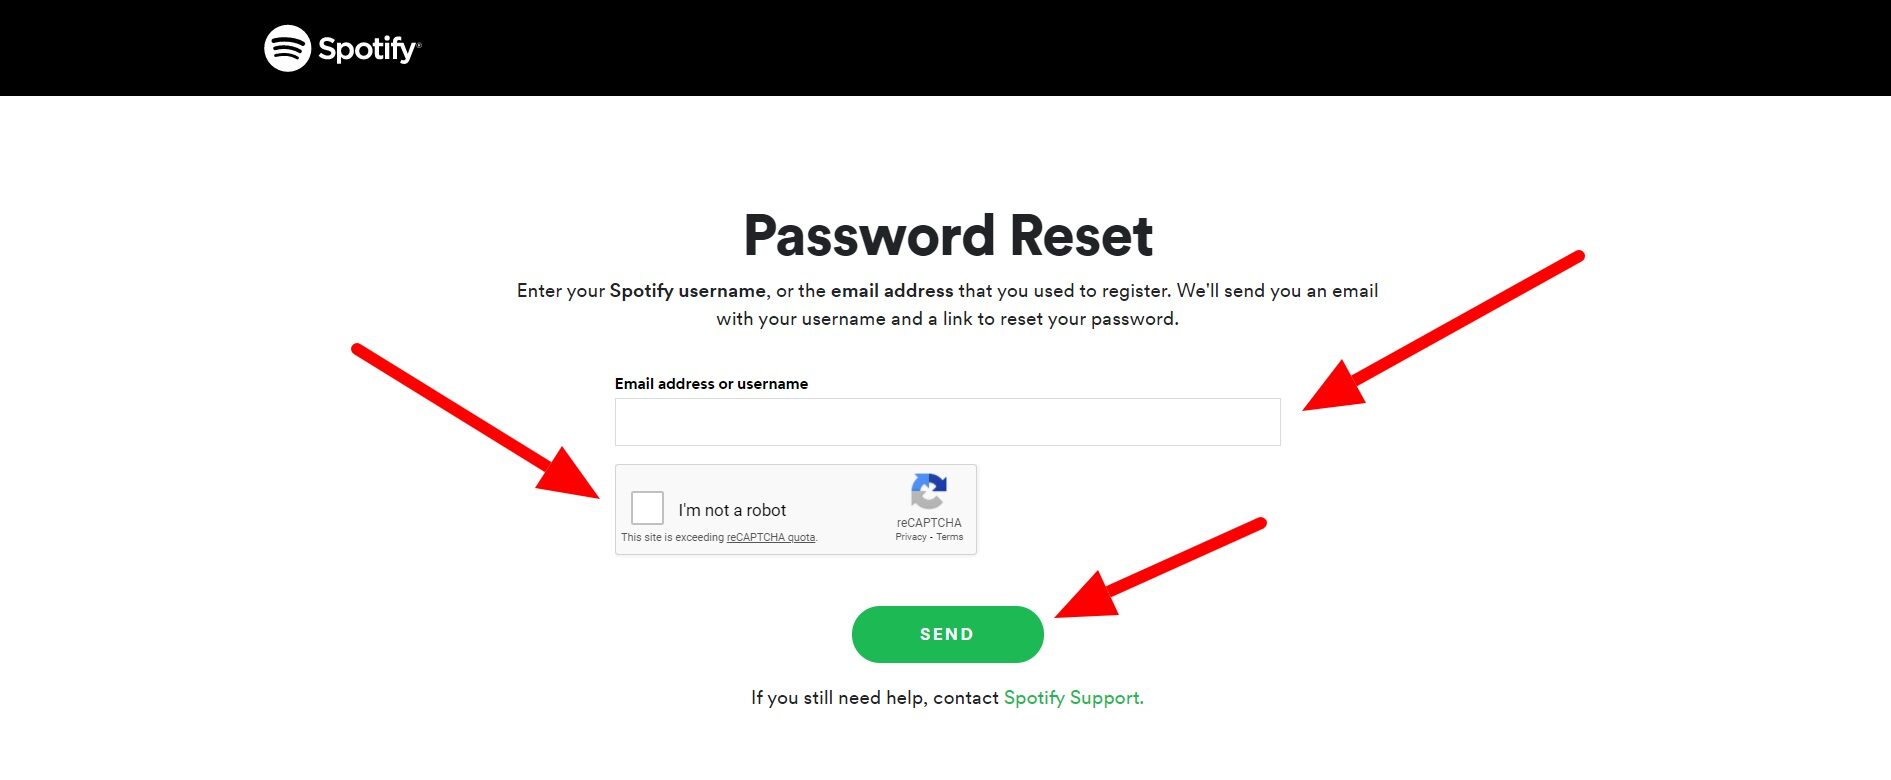 How to Reset Spotify Password When You've Forgotten It